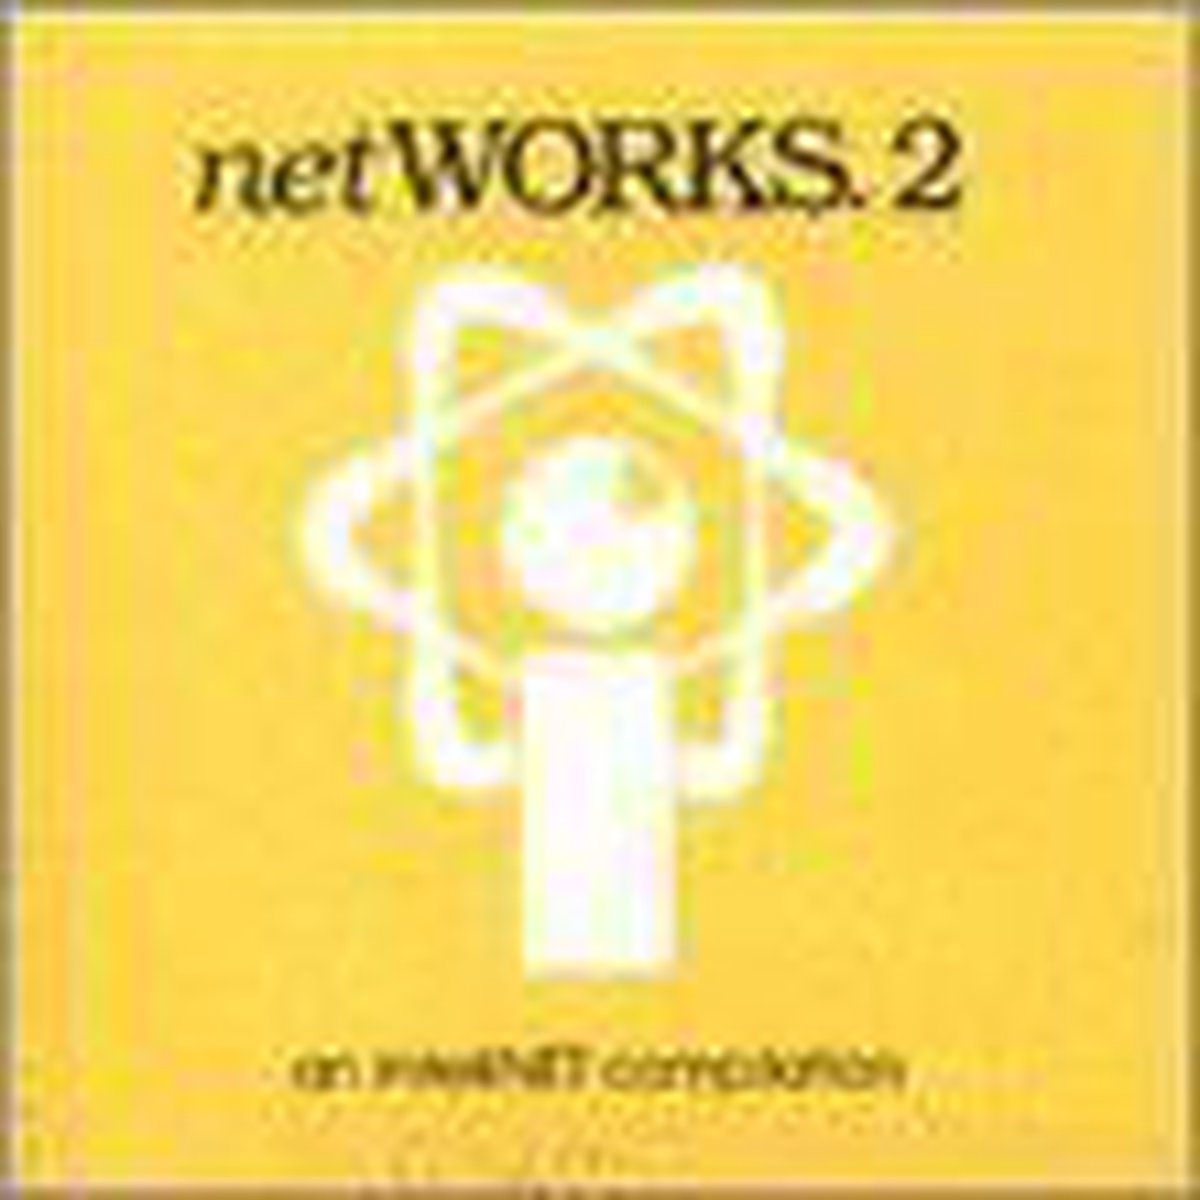 Networks 2 - various artists